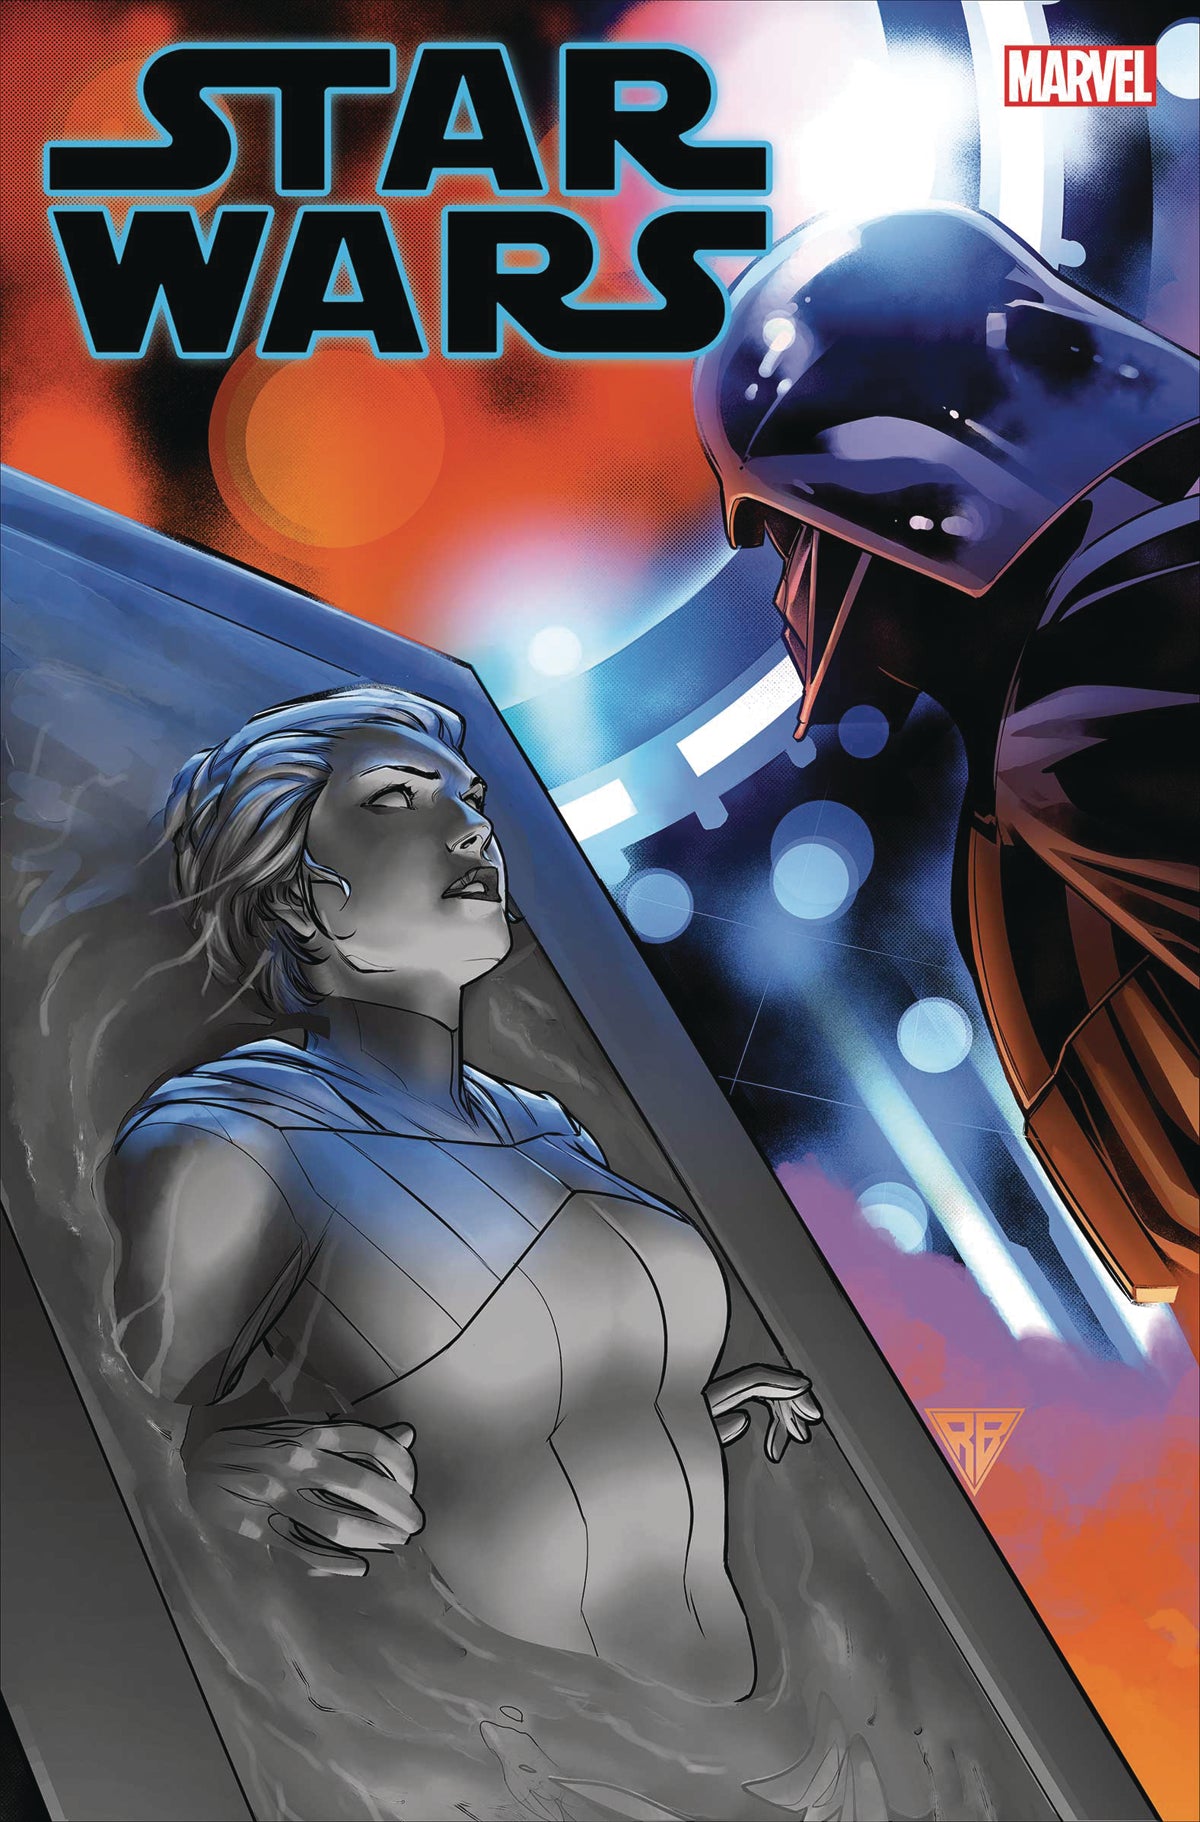 STAR WARS #4 | Game Master's Emporium (The New GME)